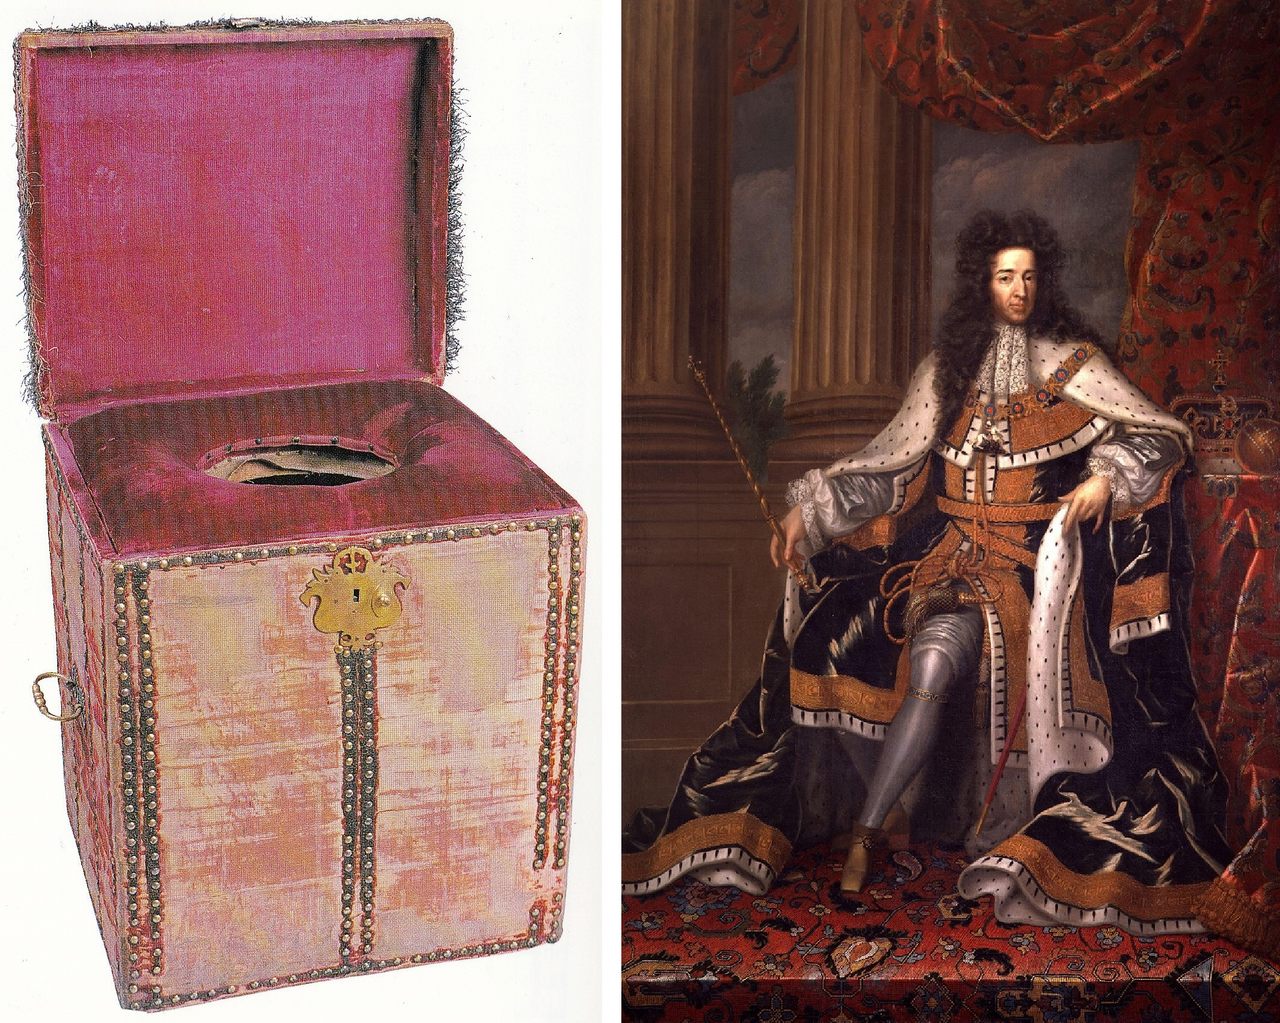 King William III and his mid-17th century 